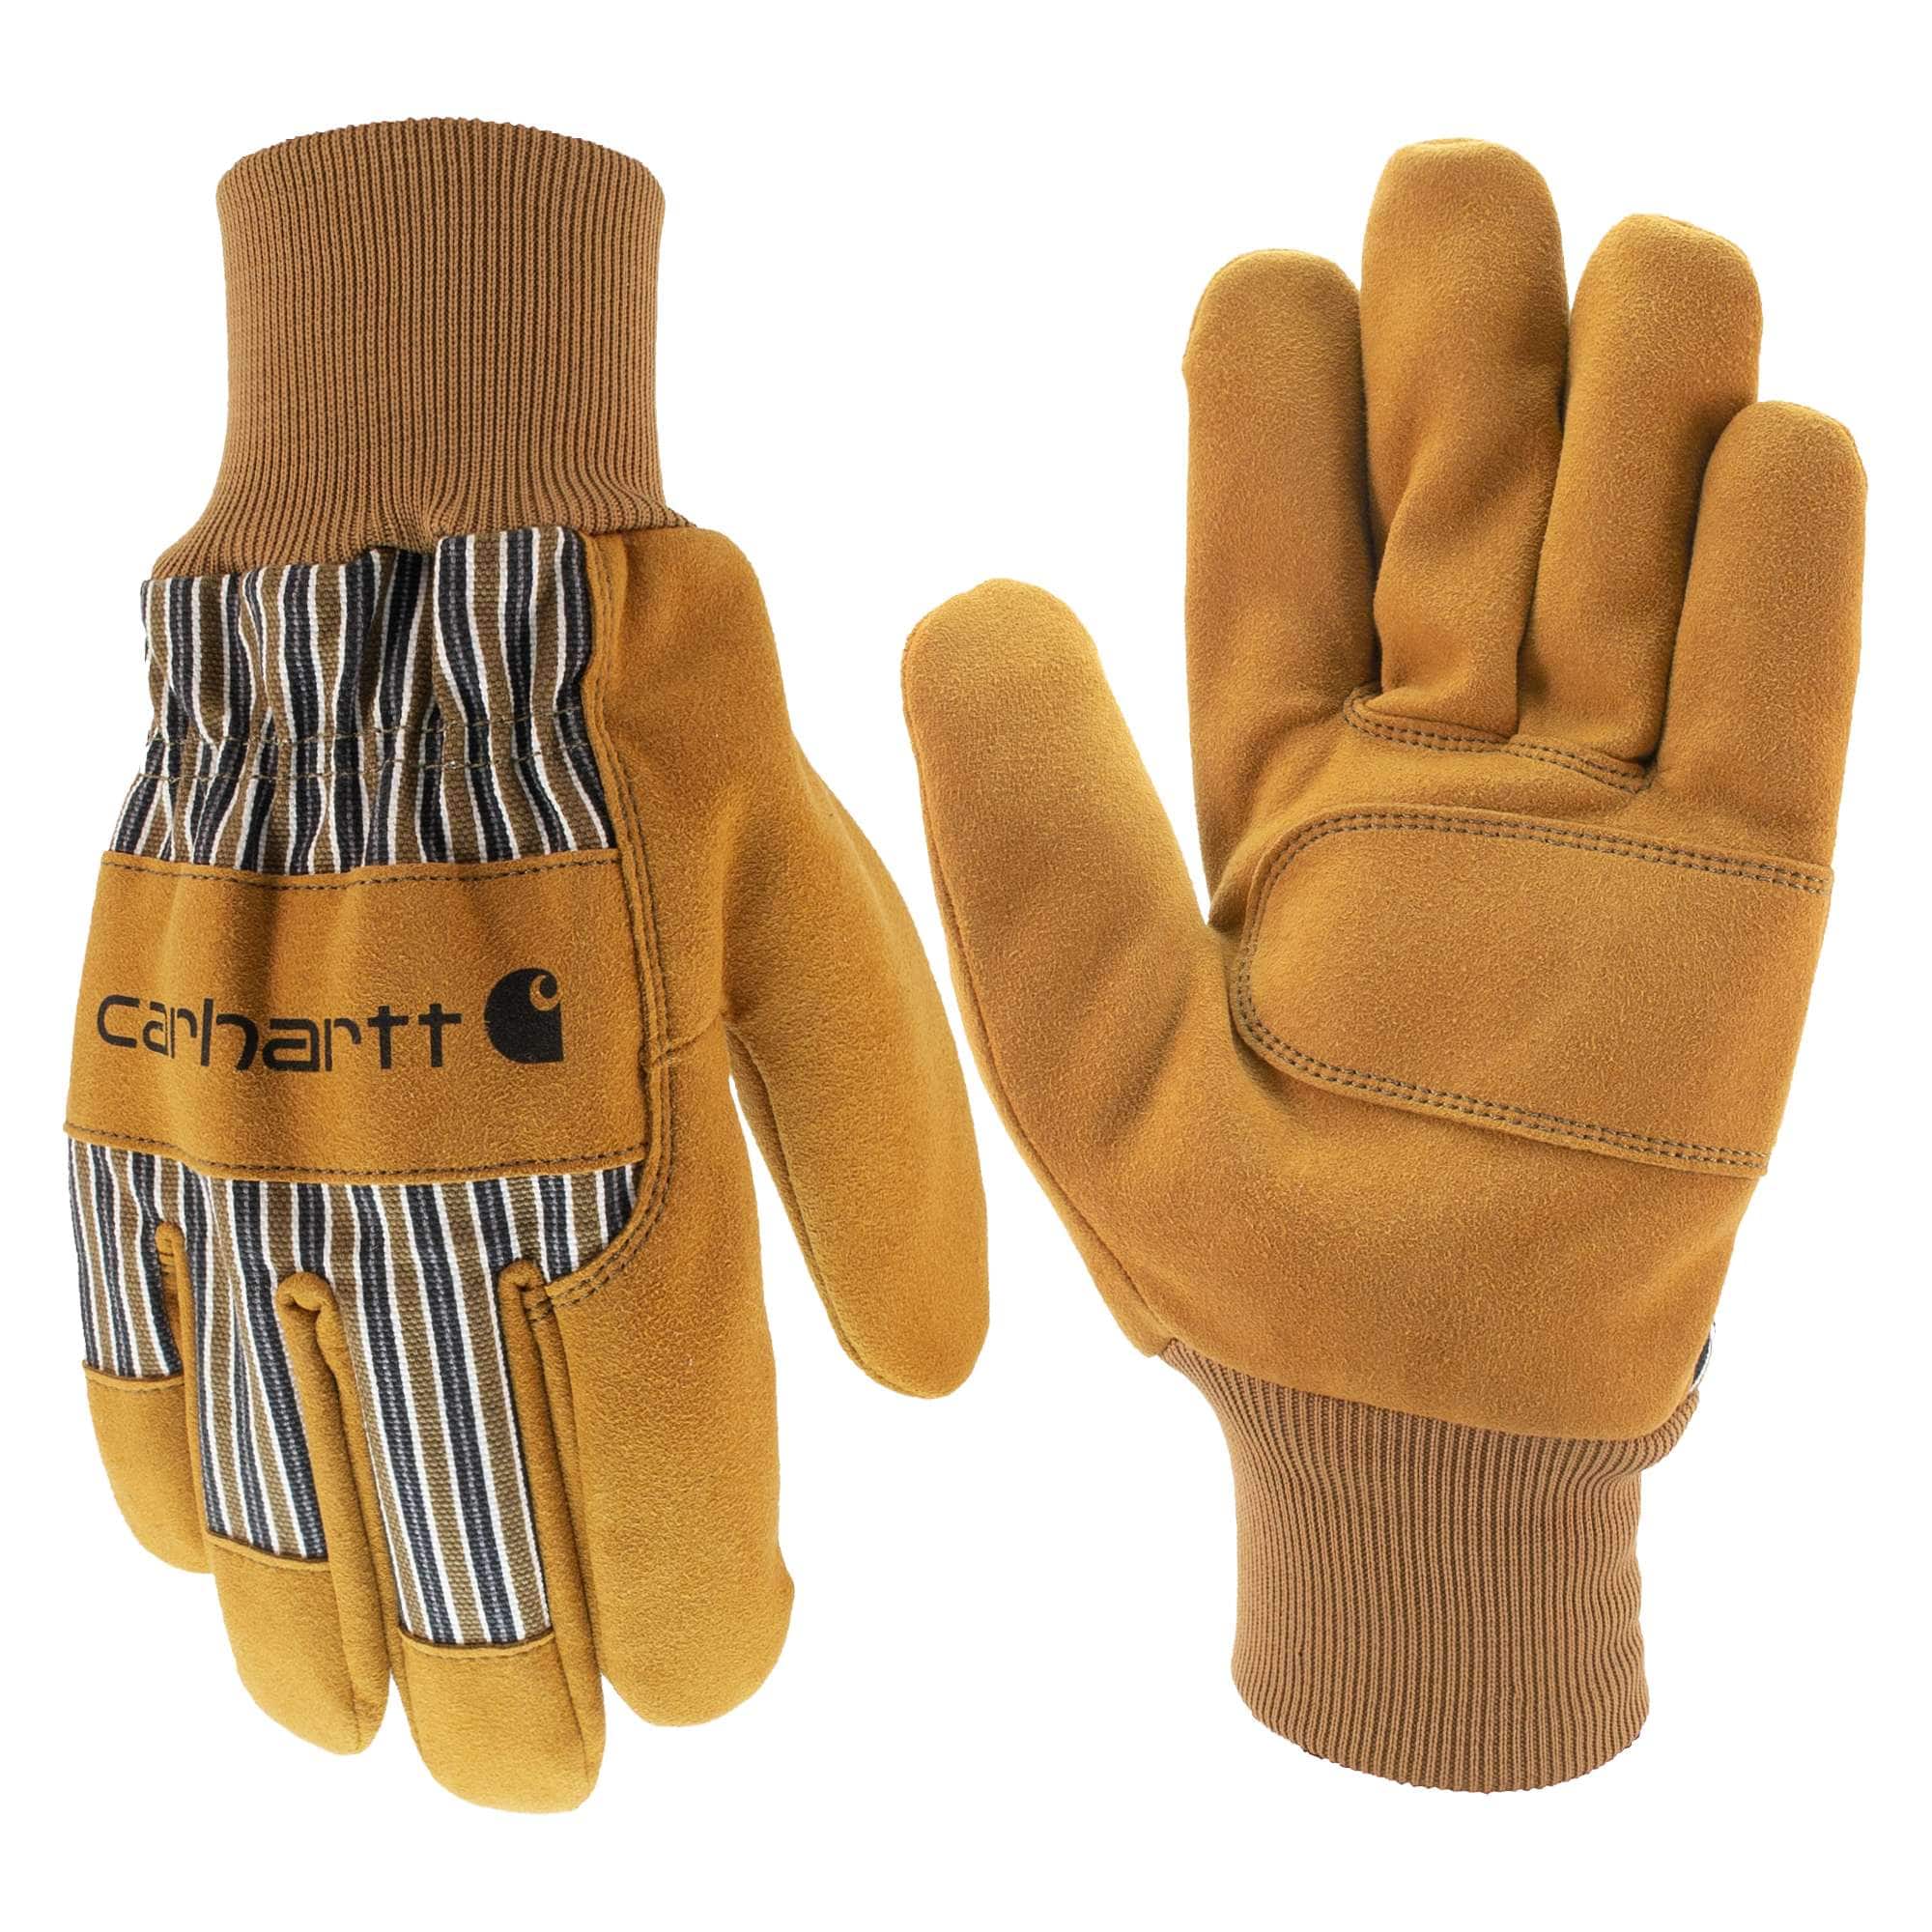 Synthetic Suede Knit Cuff Work Glove